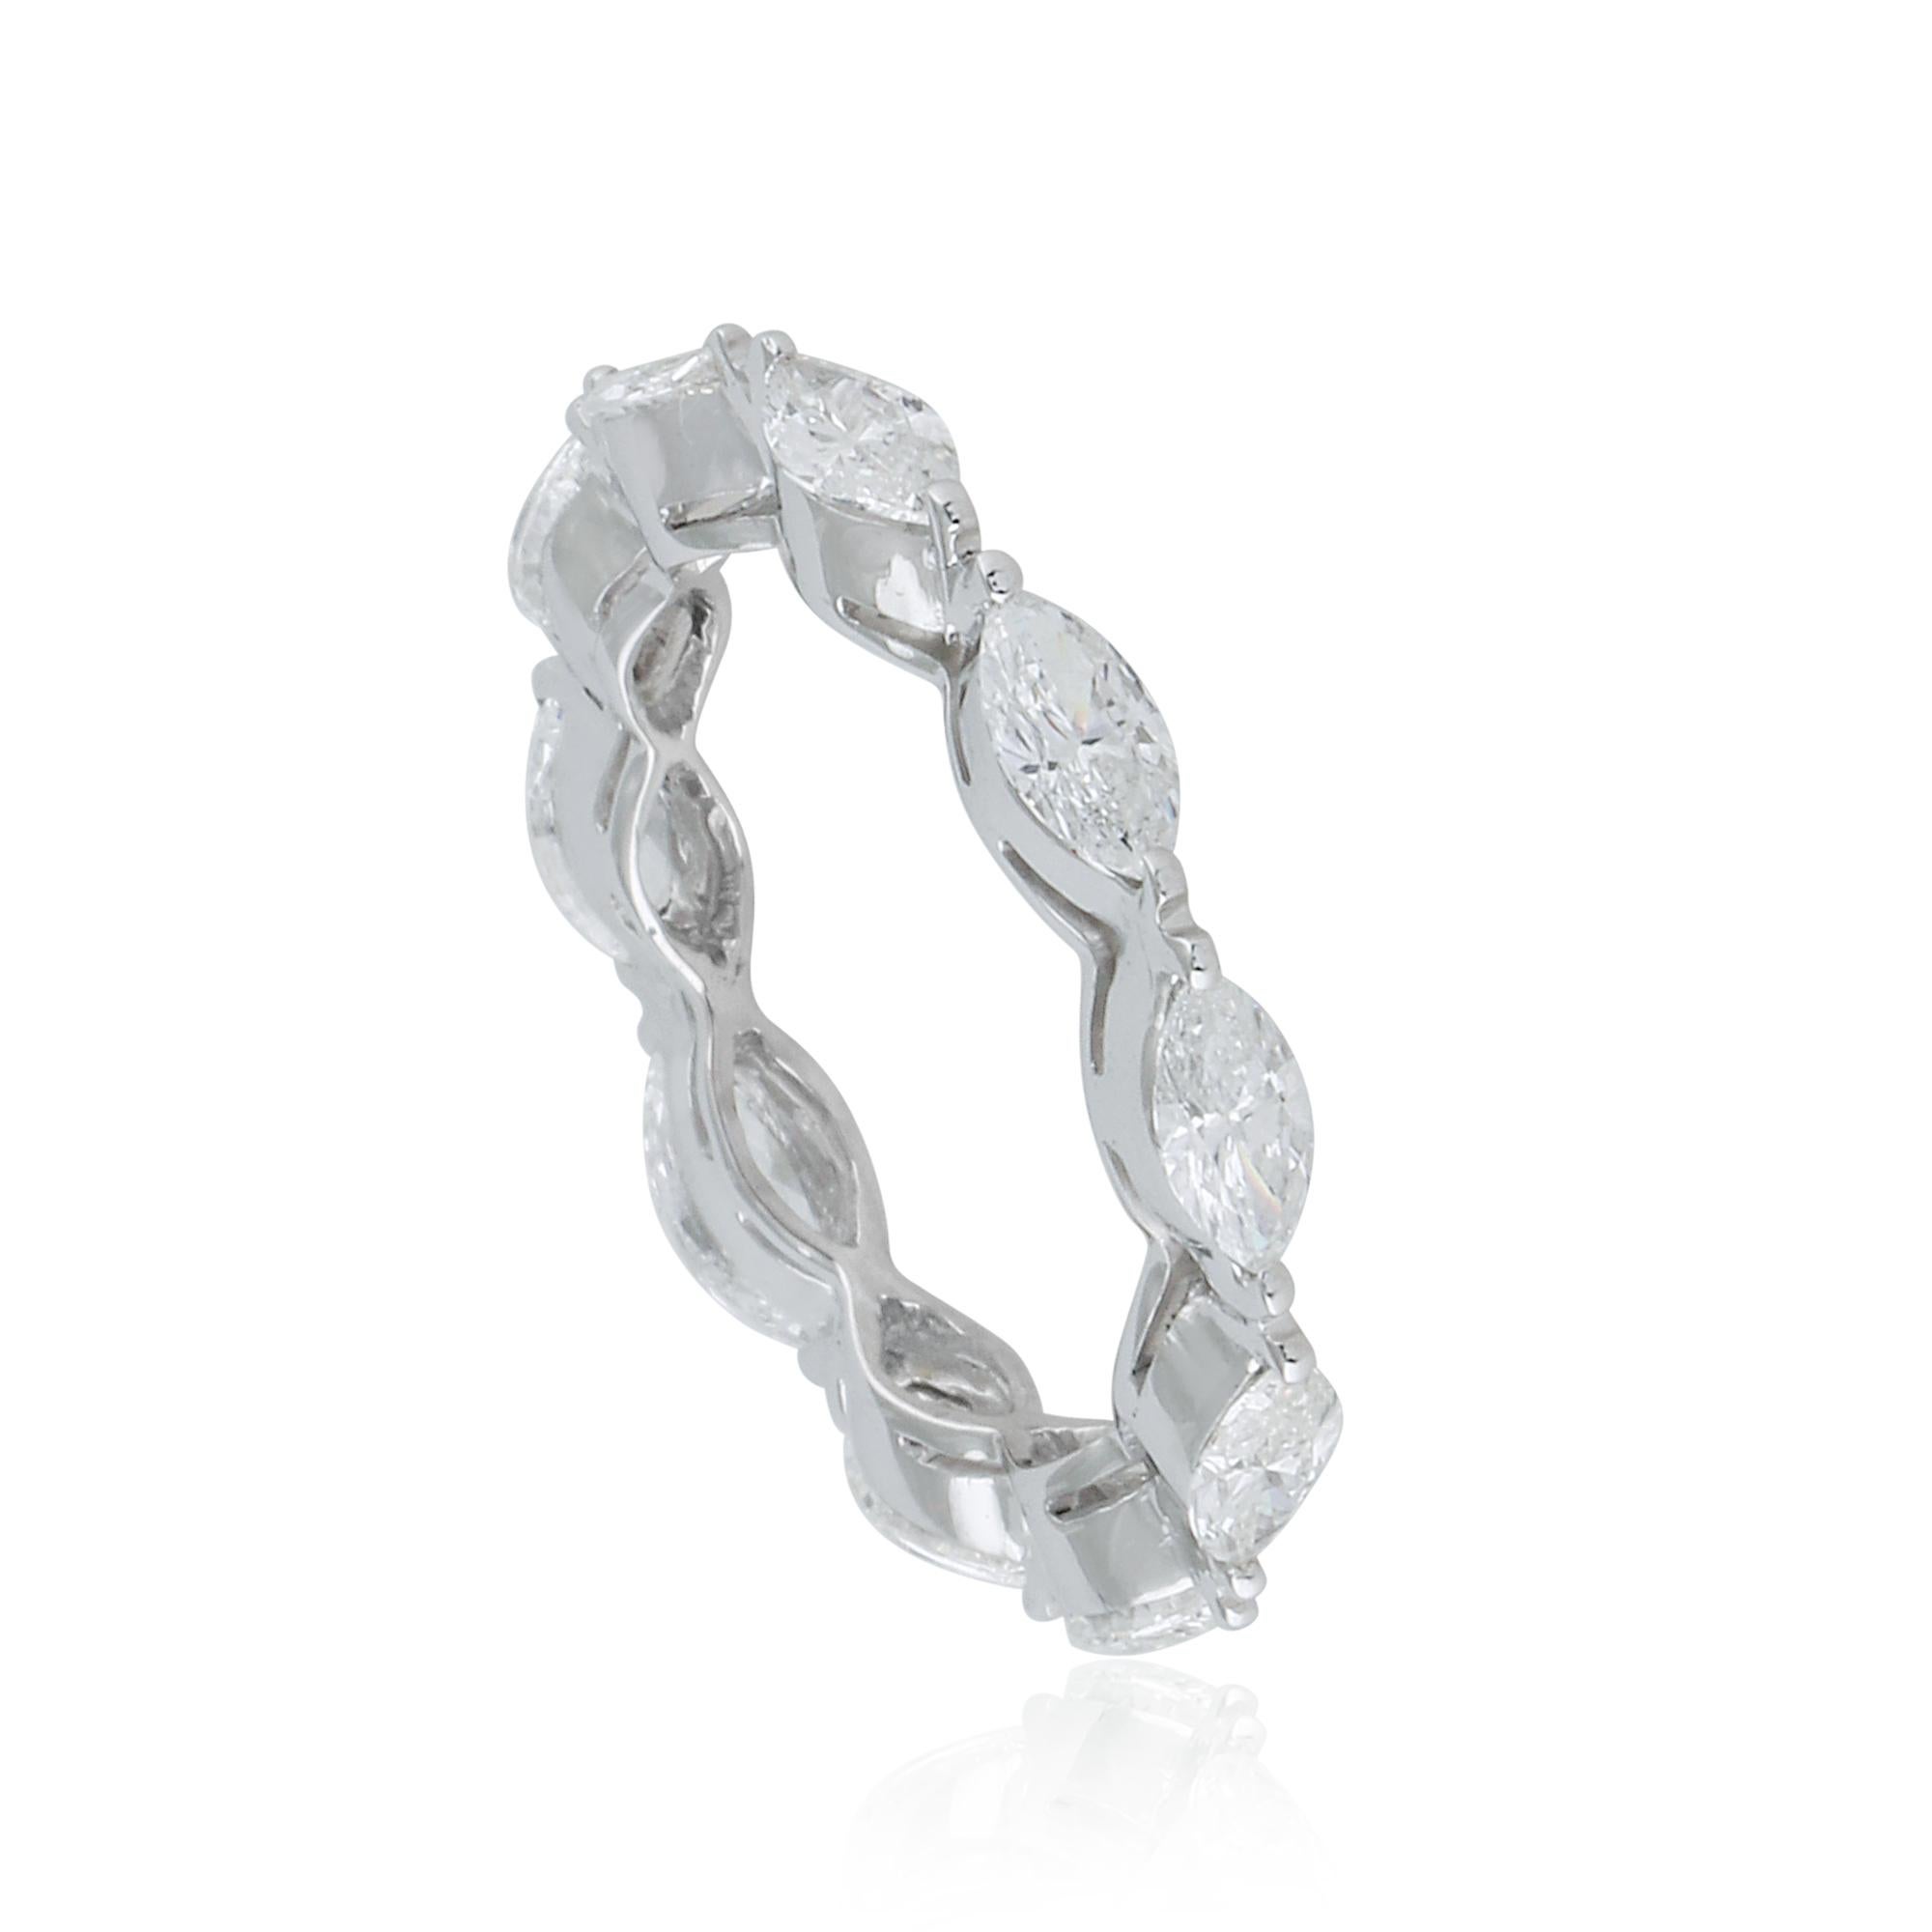 For Sale:  1.9 Carat SI Clarity HI Color Marquise Diamond Eternity Band Ring 18k White Gold 2